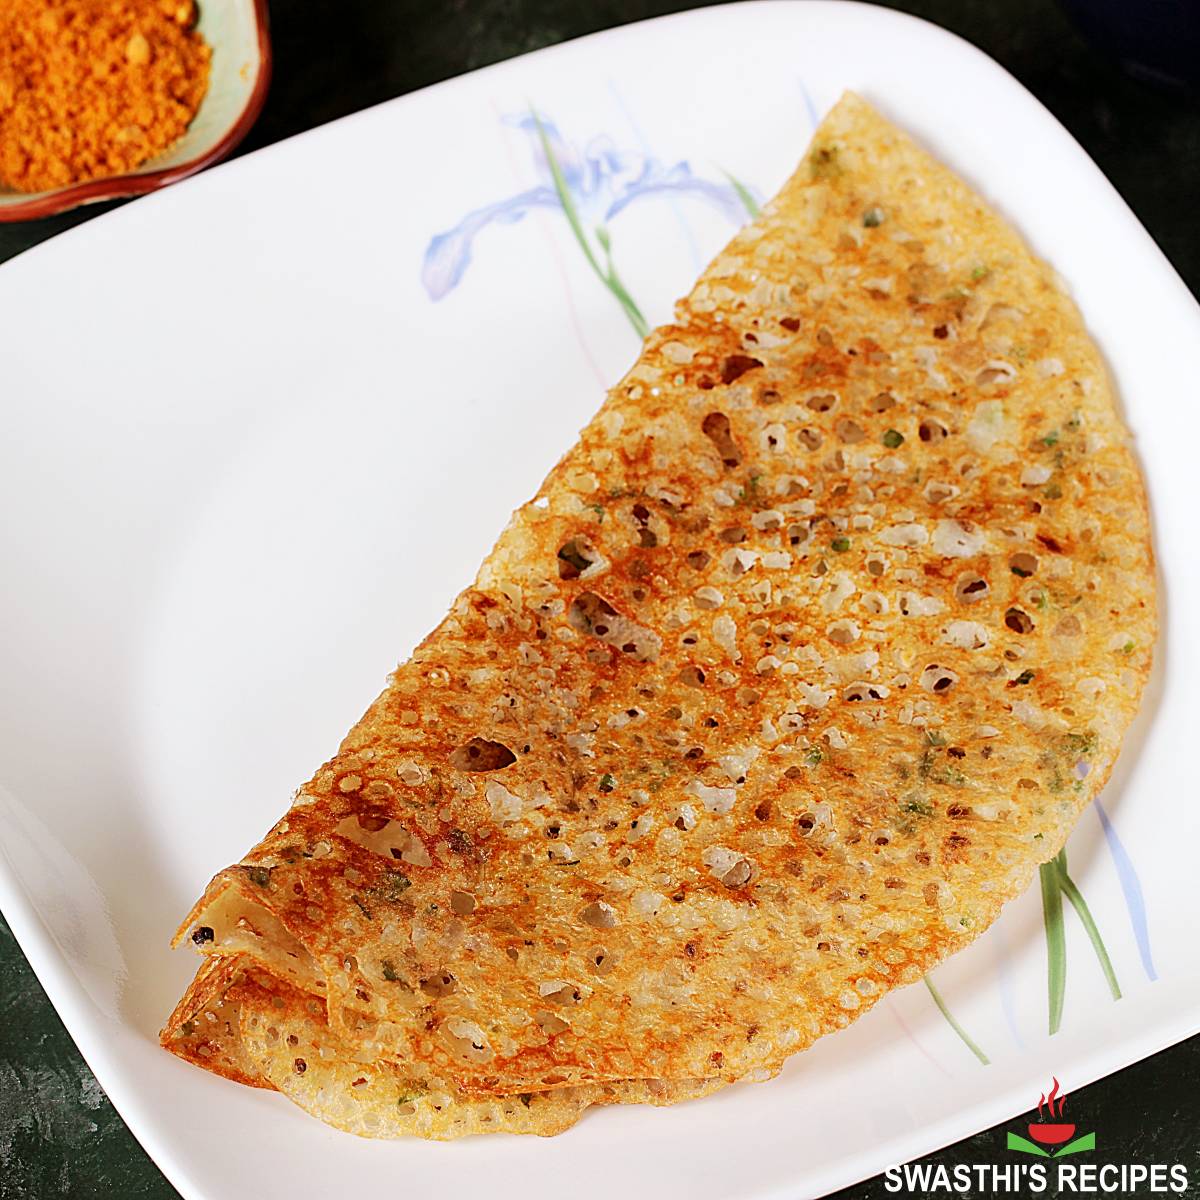 Wheat dosa also known as godhuma dosa served in a white plate